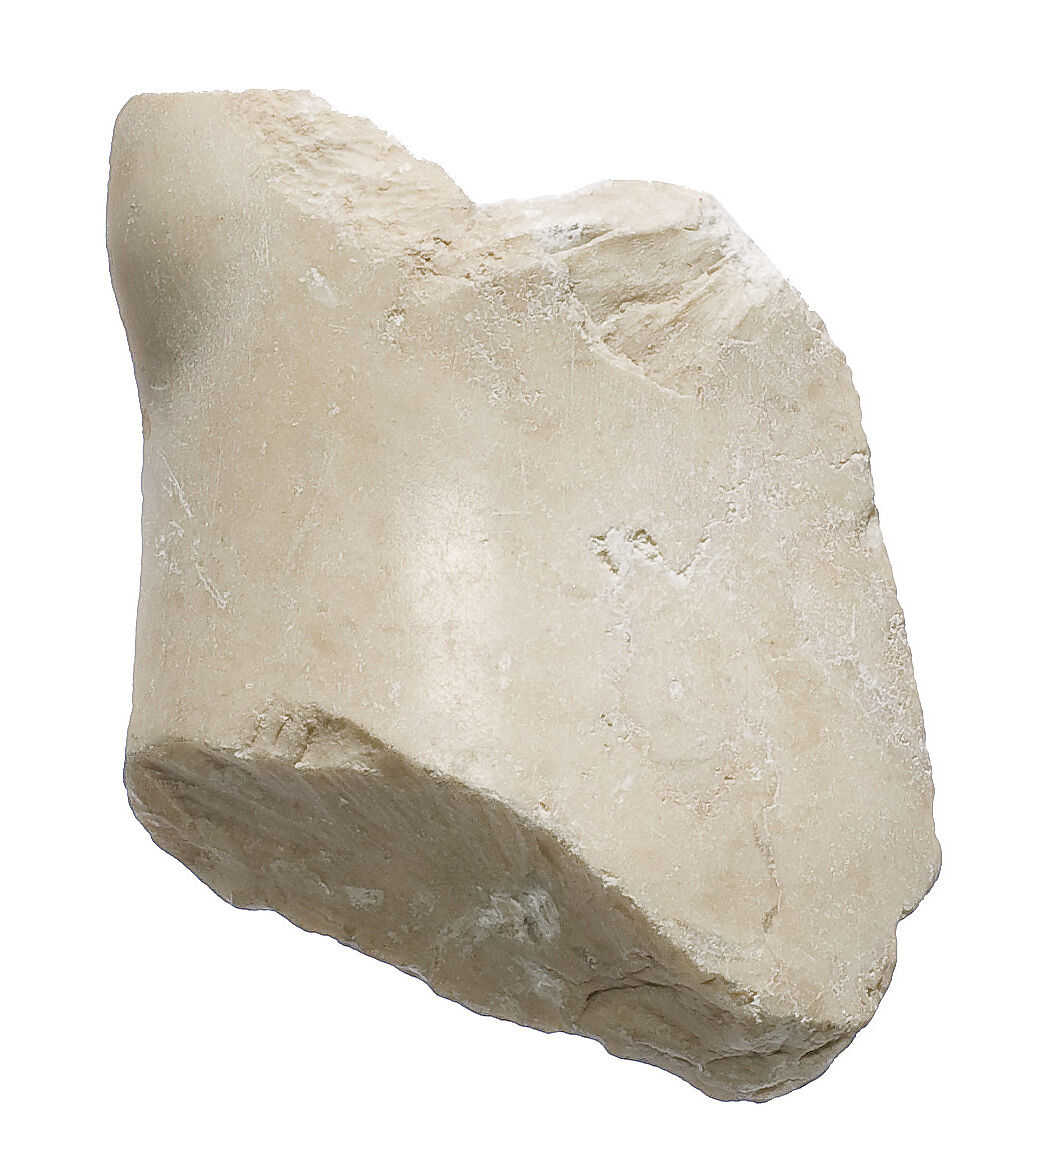 Knee fragment, probably male, Indurated limestone 